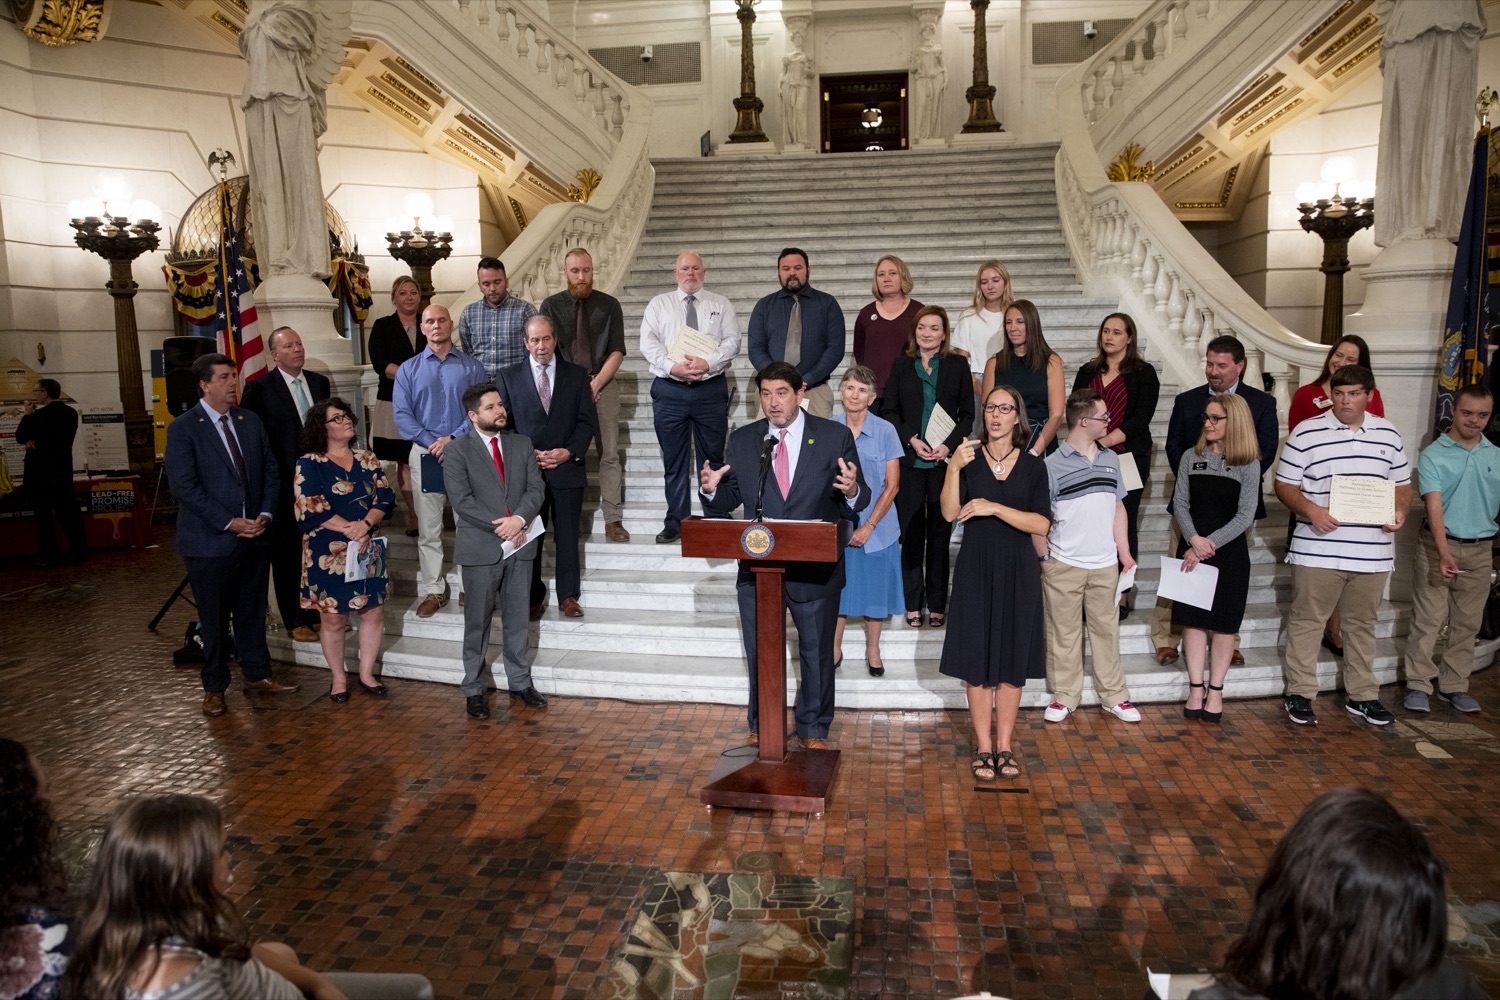 Mike Walsh, DCNR Deputy Secretary for Administration, congratulates the individuals working towards healthy and environmentally friendly schools, in Harrisburg, PA on September 20, 2022.<br><a href="https://filesource.amperwave.net/commonwealthofpa/photo/22151_dcnr_pathways_cz_04.jpg" target="_blank">⇣ Download Photo</a>